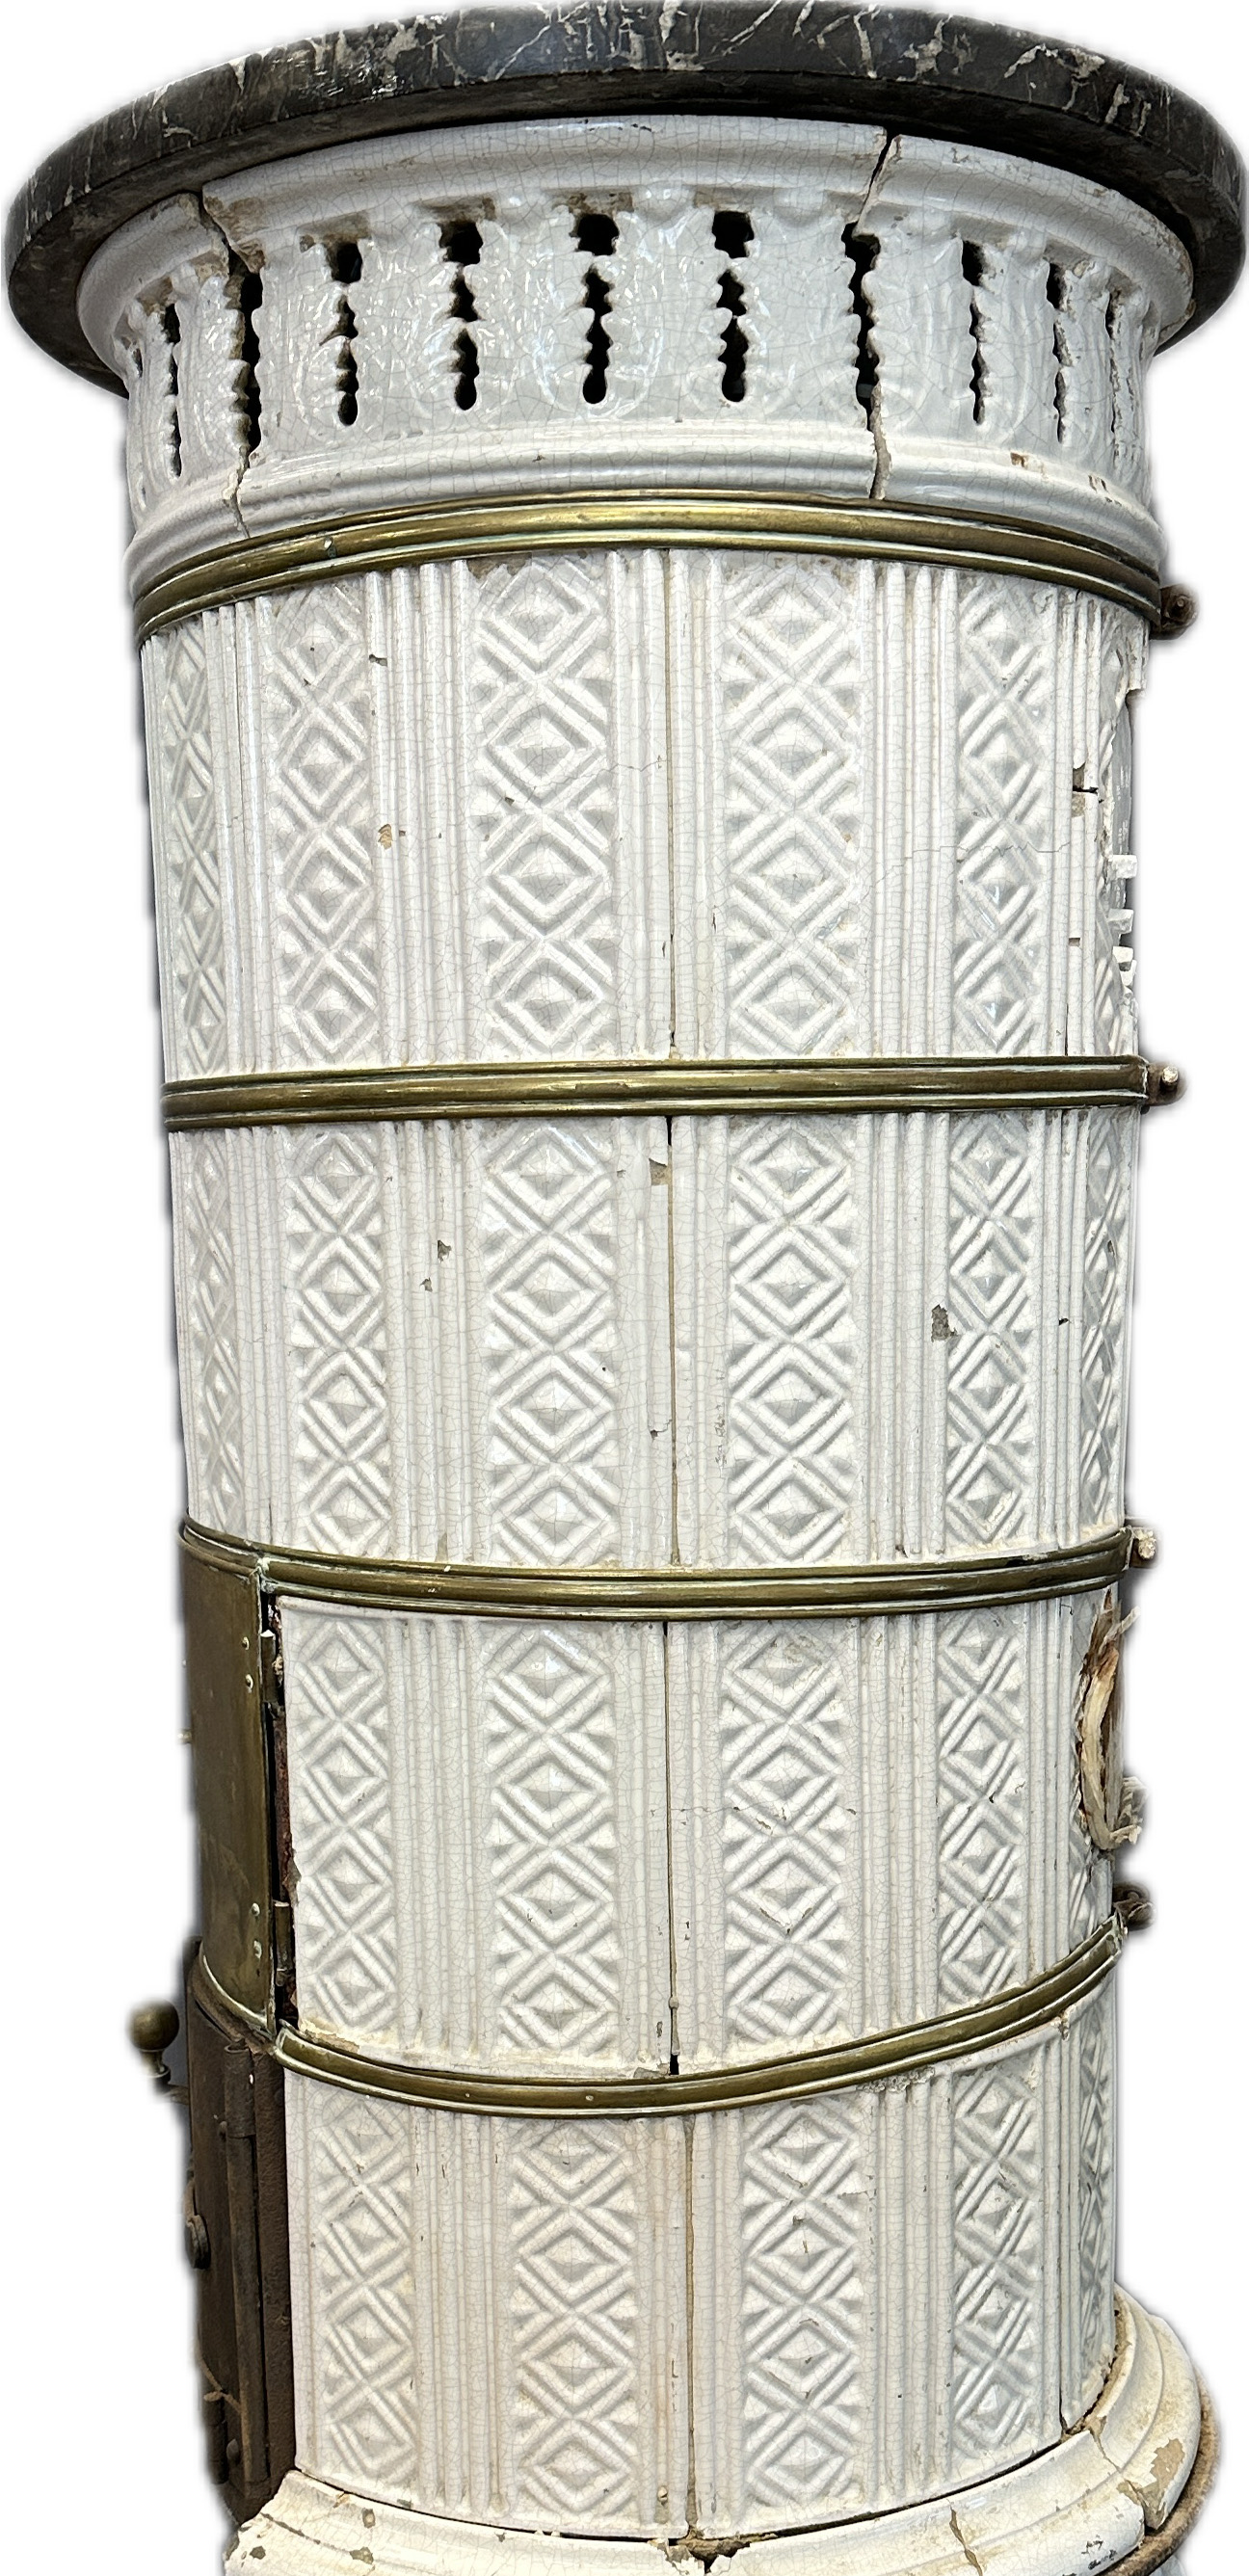 White Biedermeier round stove with tiles in relief structure. - Image 4 of 19